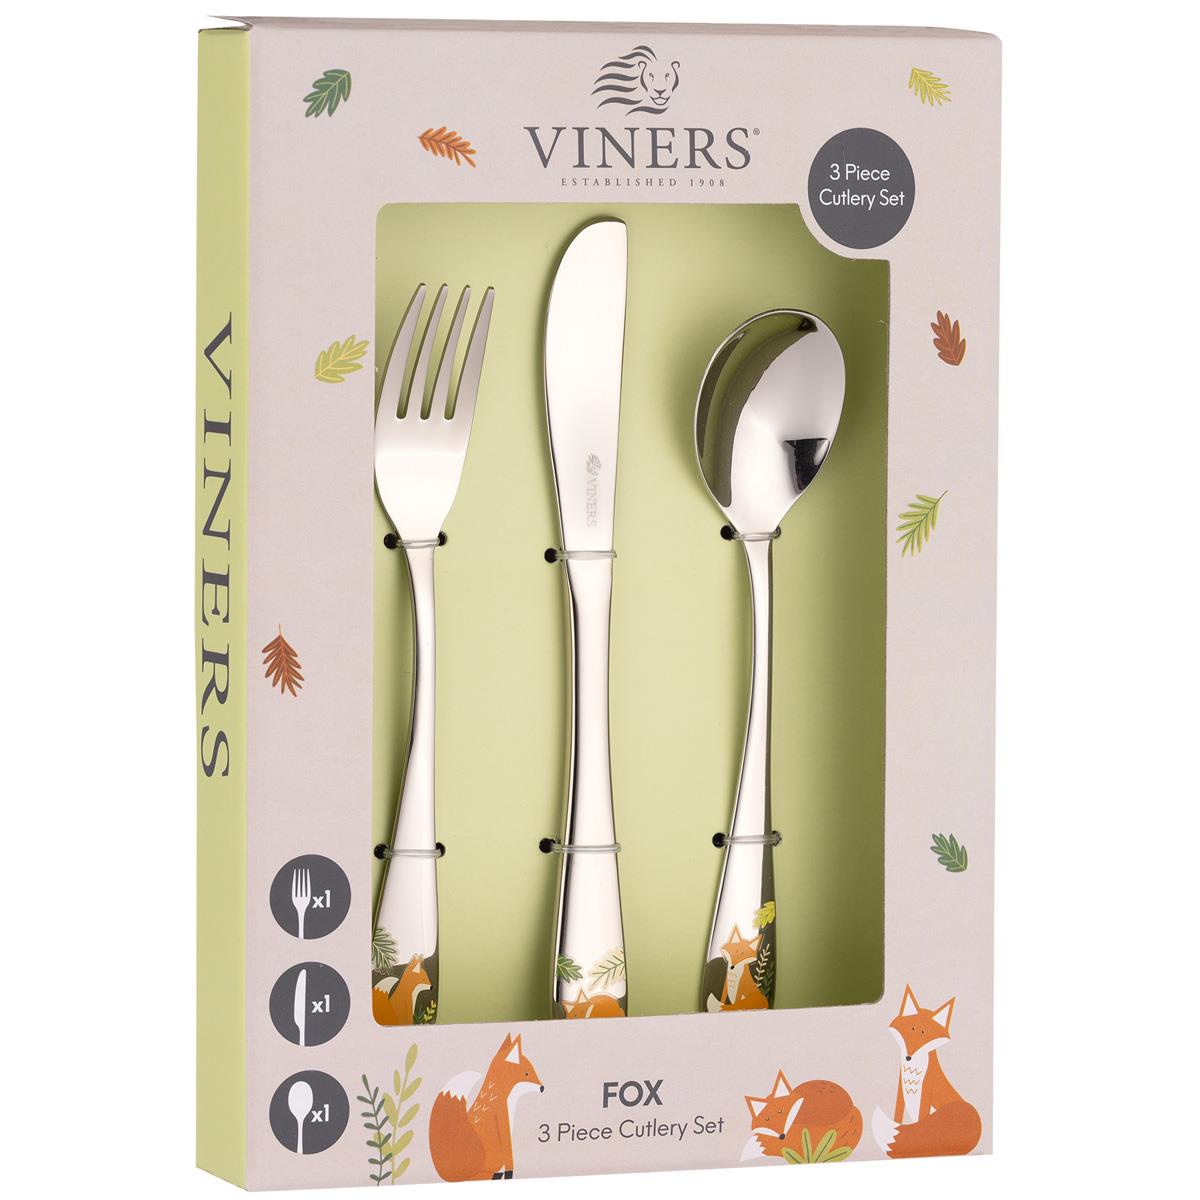 Is the Viners Fox Cutlery Set dishwasher proof? Would the fox design come off in the dishwasher? Hand wash only?